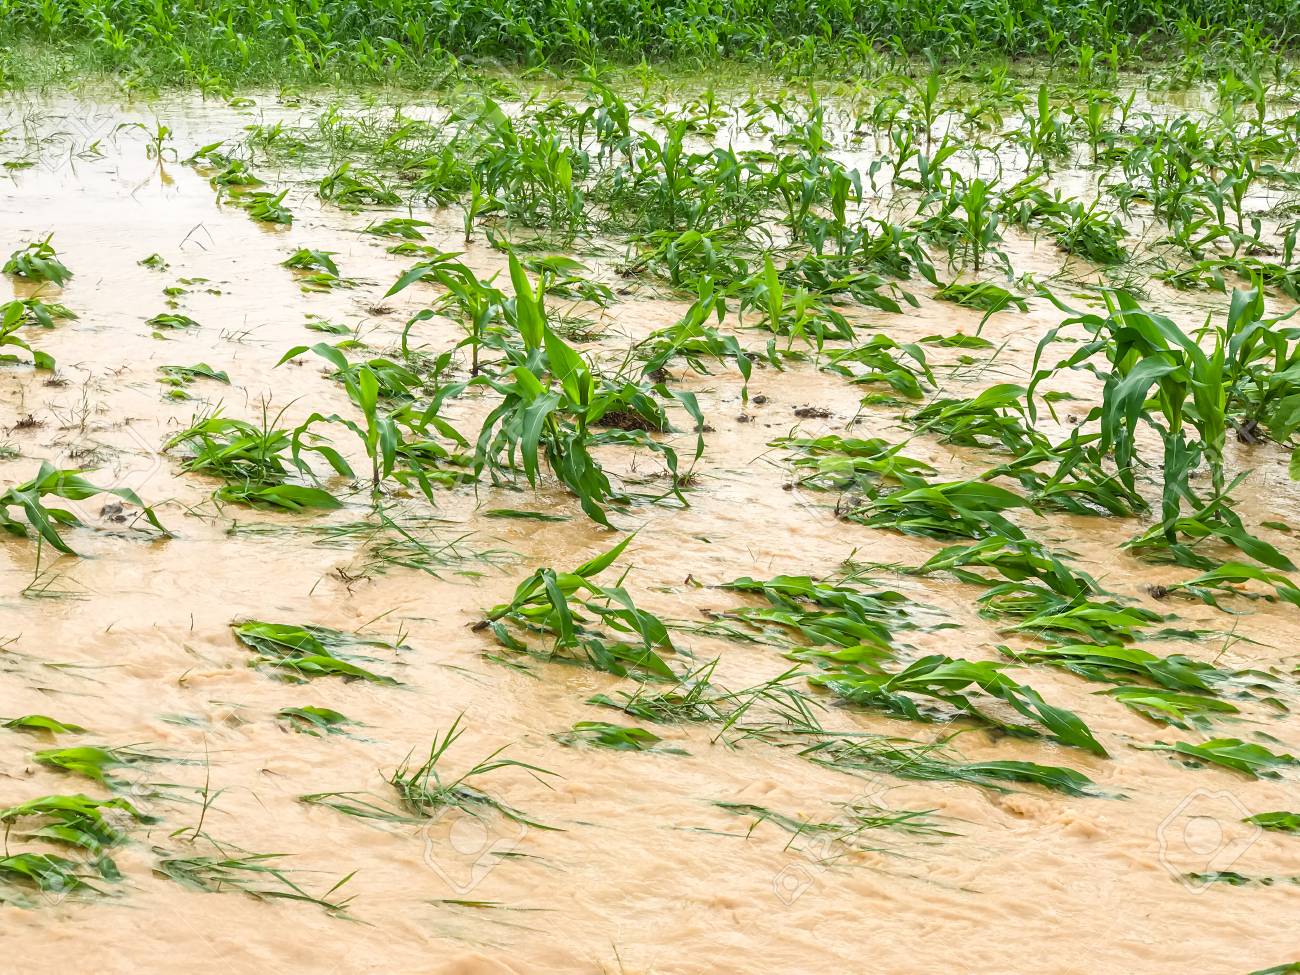 Maharashtra: Tremendous loss in agriculture due to heavy rainfall - The  Agrotech Daily